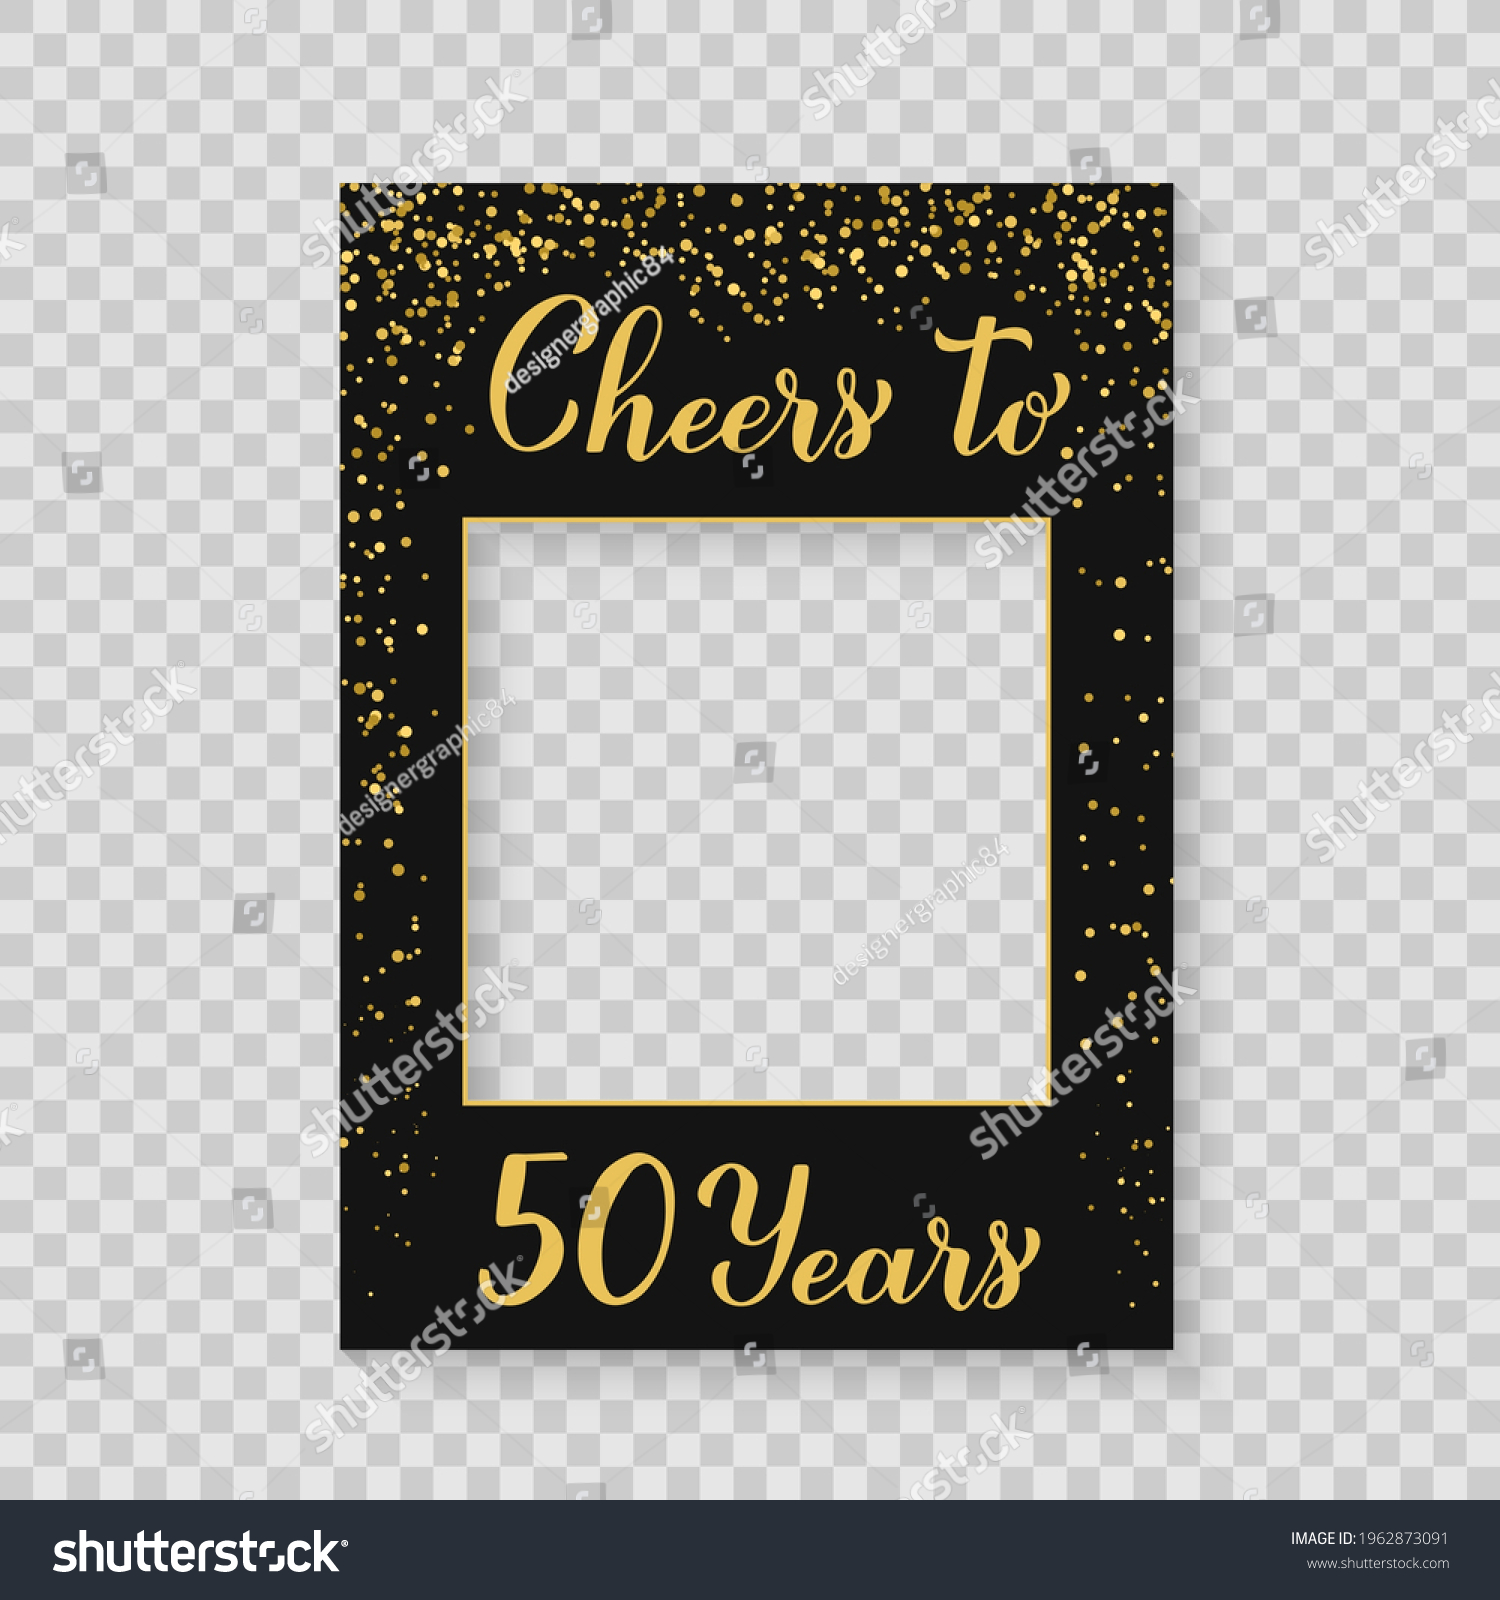 SVG of Cheers to 50 Years photo booth frame on a transparent background. 50th Birthday or anniversary photobooth props. Black and gold confetti party decorations. Vector template.  svg